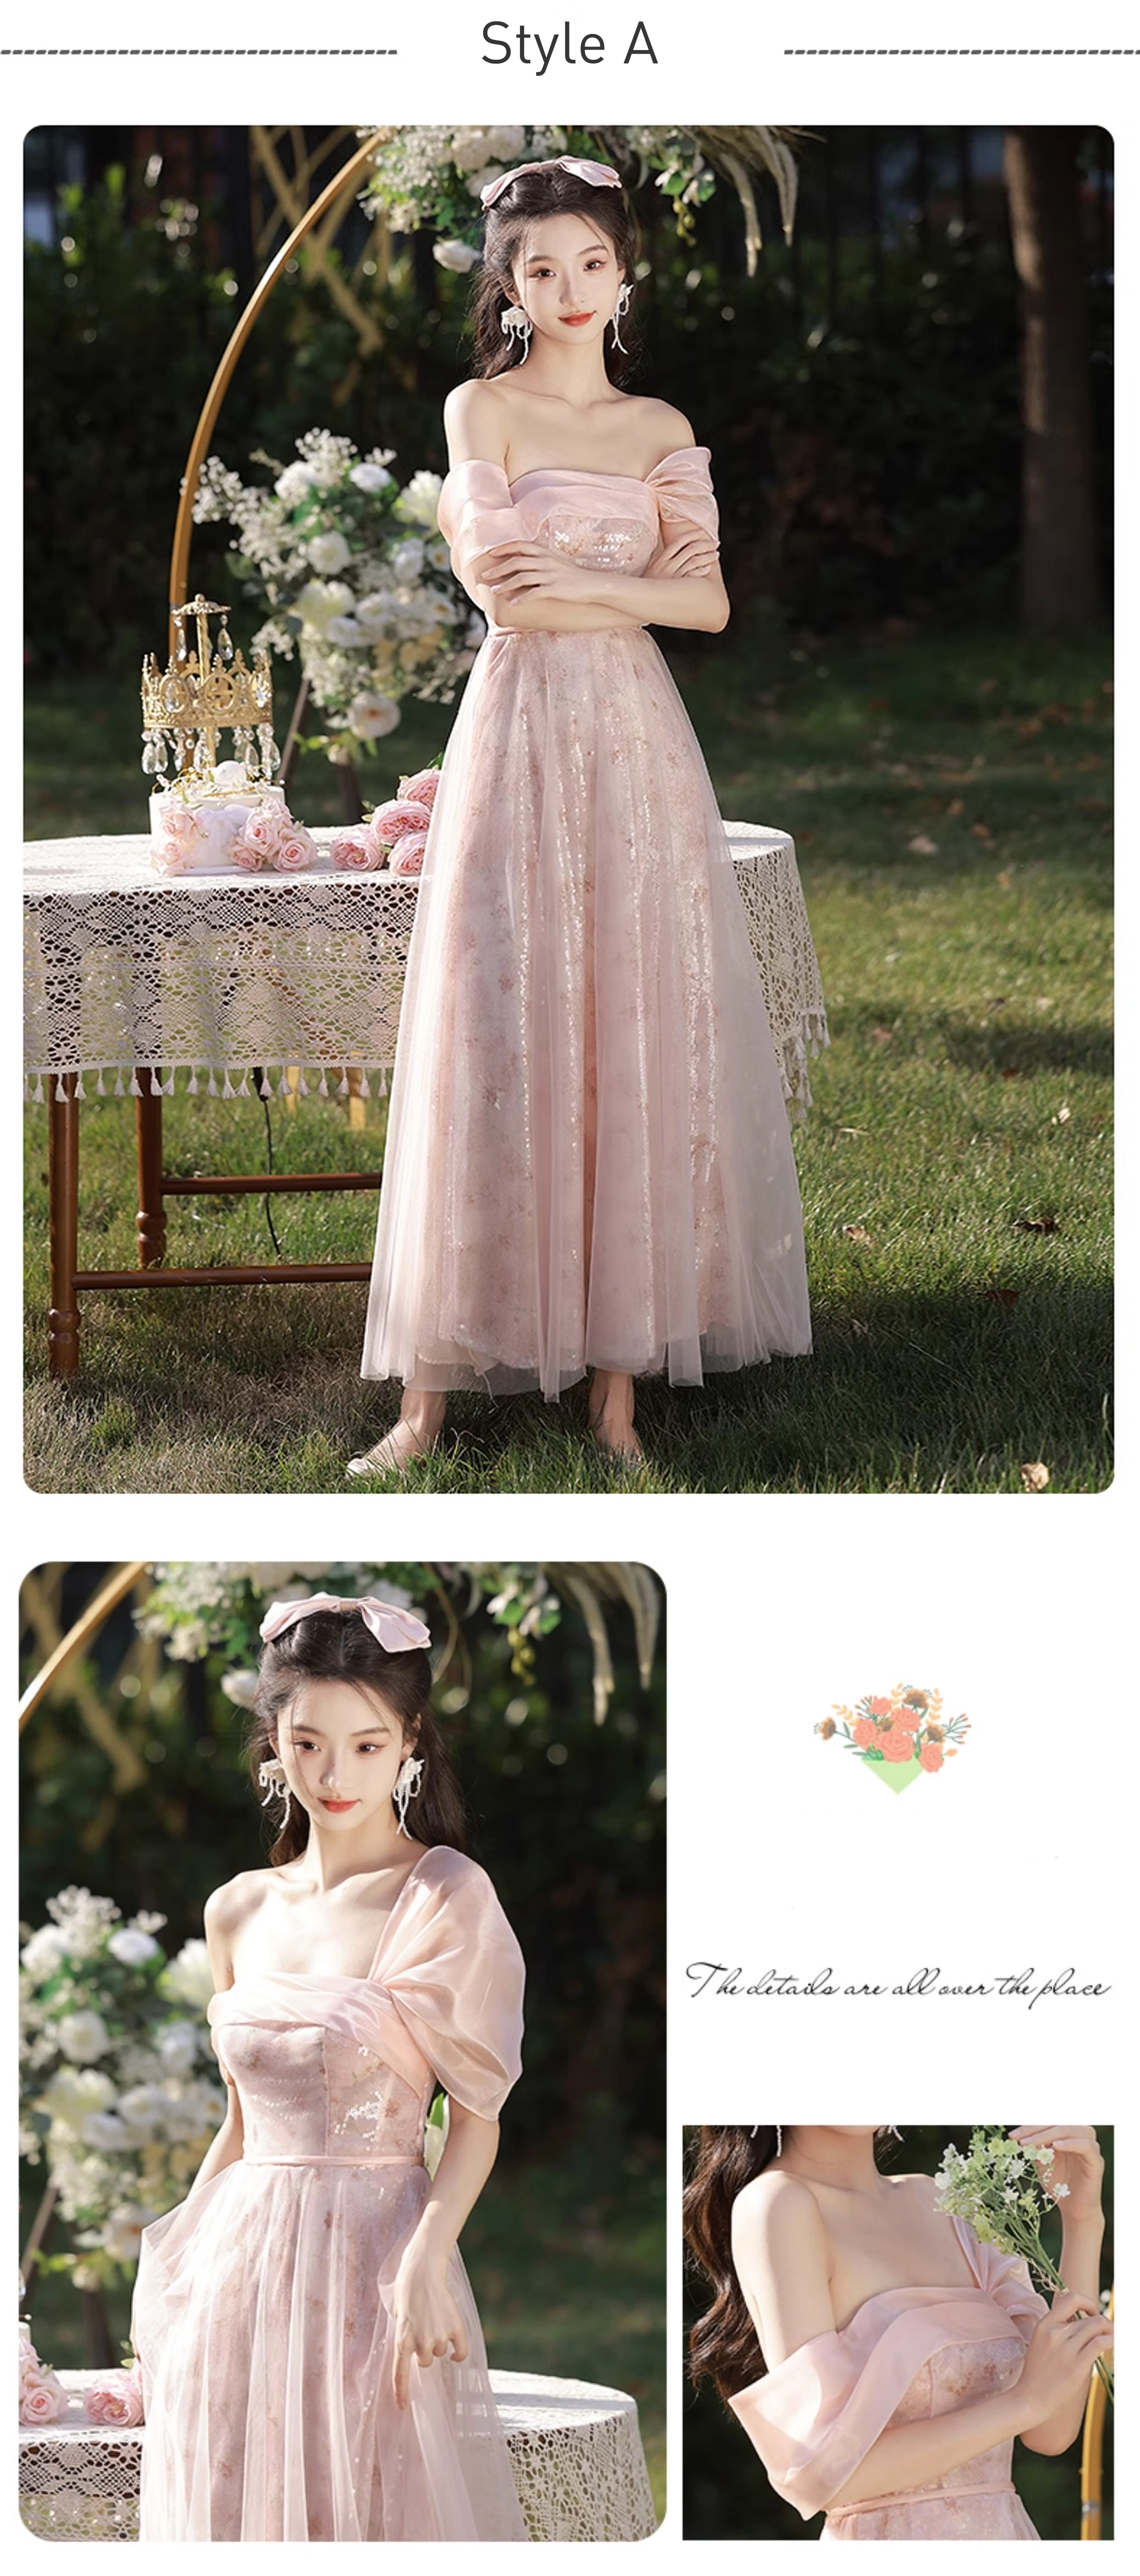 Classy-Pink-Tulle-Floral-Evening-Party-Cocktail-Prom-Bridesmaid-Maxi-Dress16